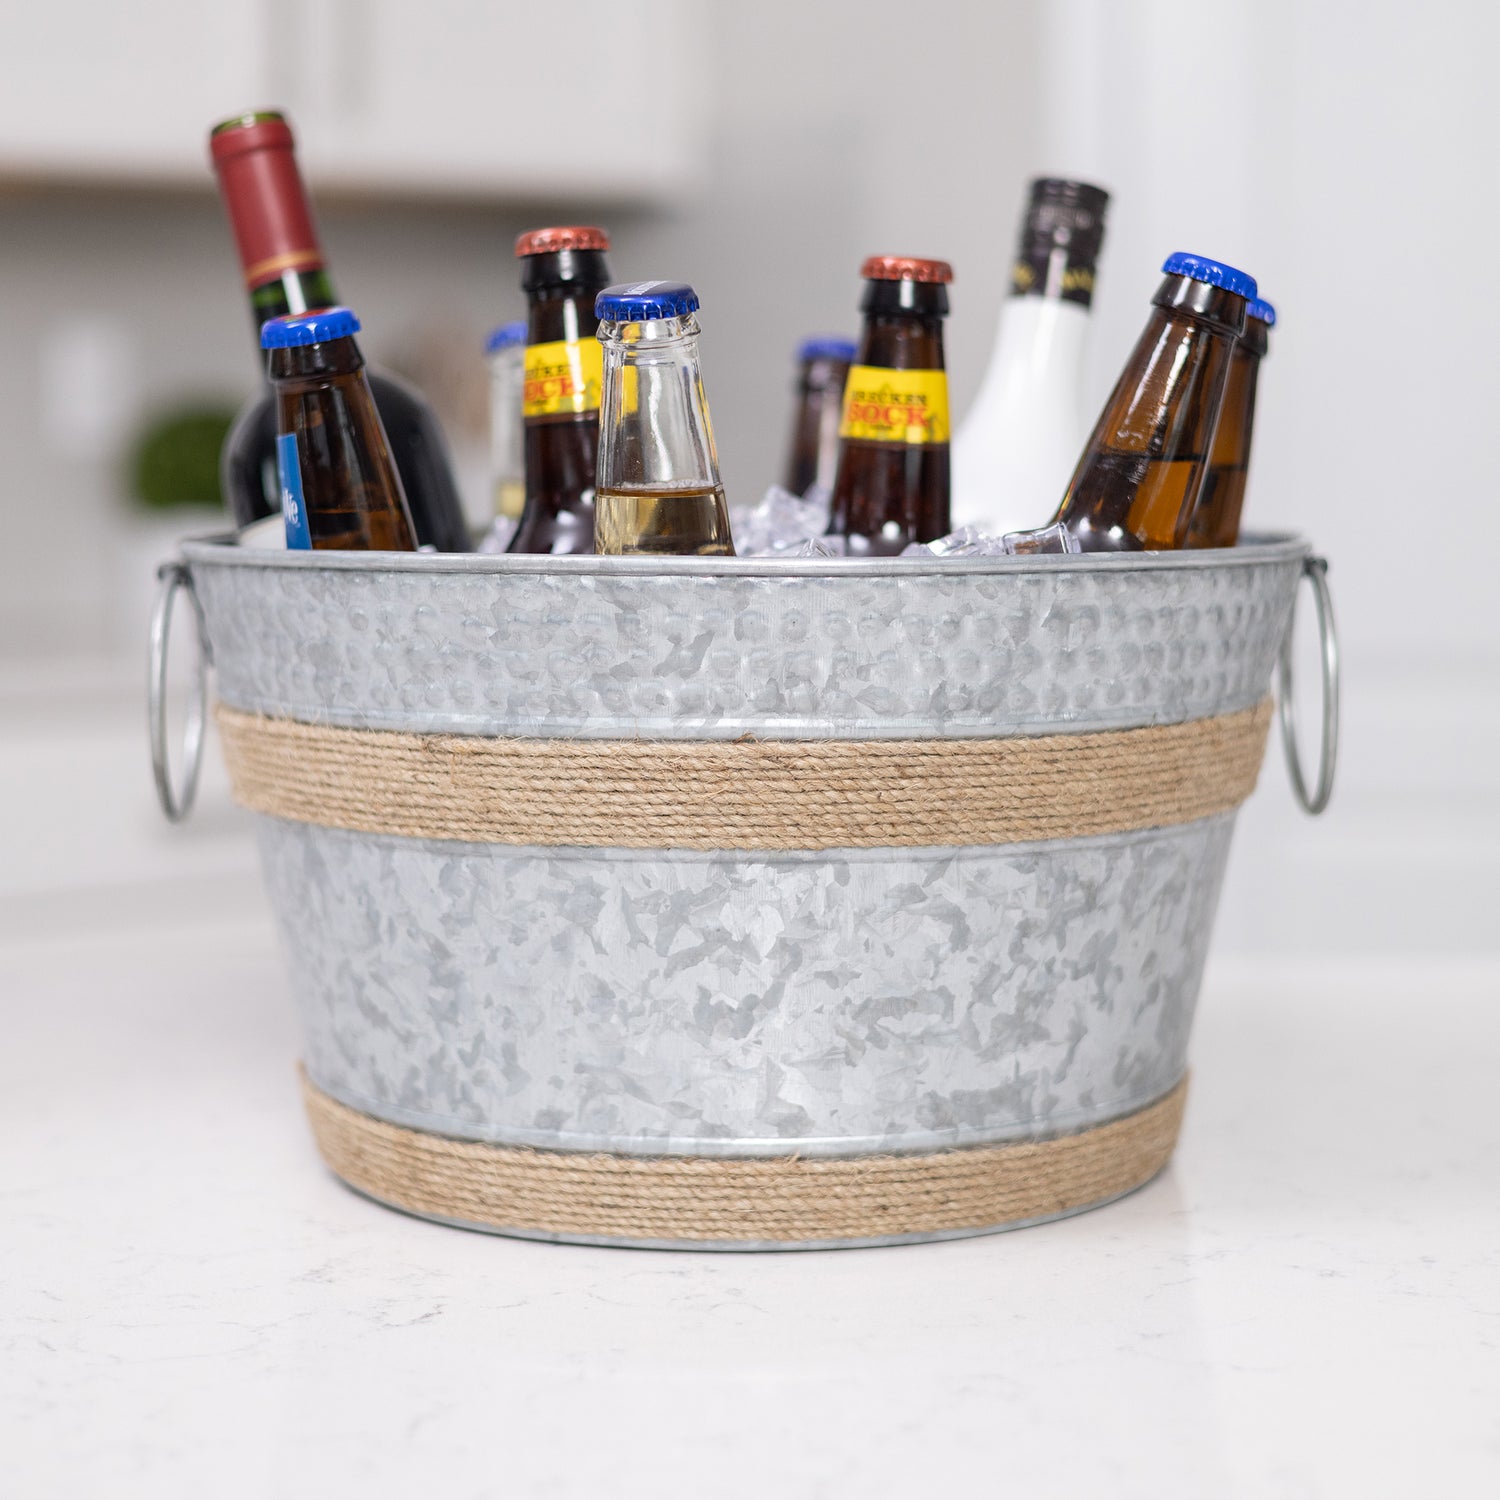 Introducing our galvanized ice bucket with farmhouse flair! Crafted from rustic galvanized material and adorned with twine rope accents, this bucket seamlessly blends farmhouse style with functionality. Perfect for any home setting, it's an ideal addition to your kitchen or a thoughtful gift. Complete the charm by including a personalized message, making it a distinctive and heartfelt present for weddings, anniversaries, or housewarmings. 